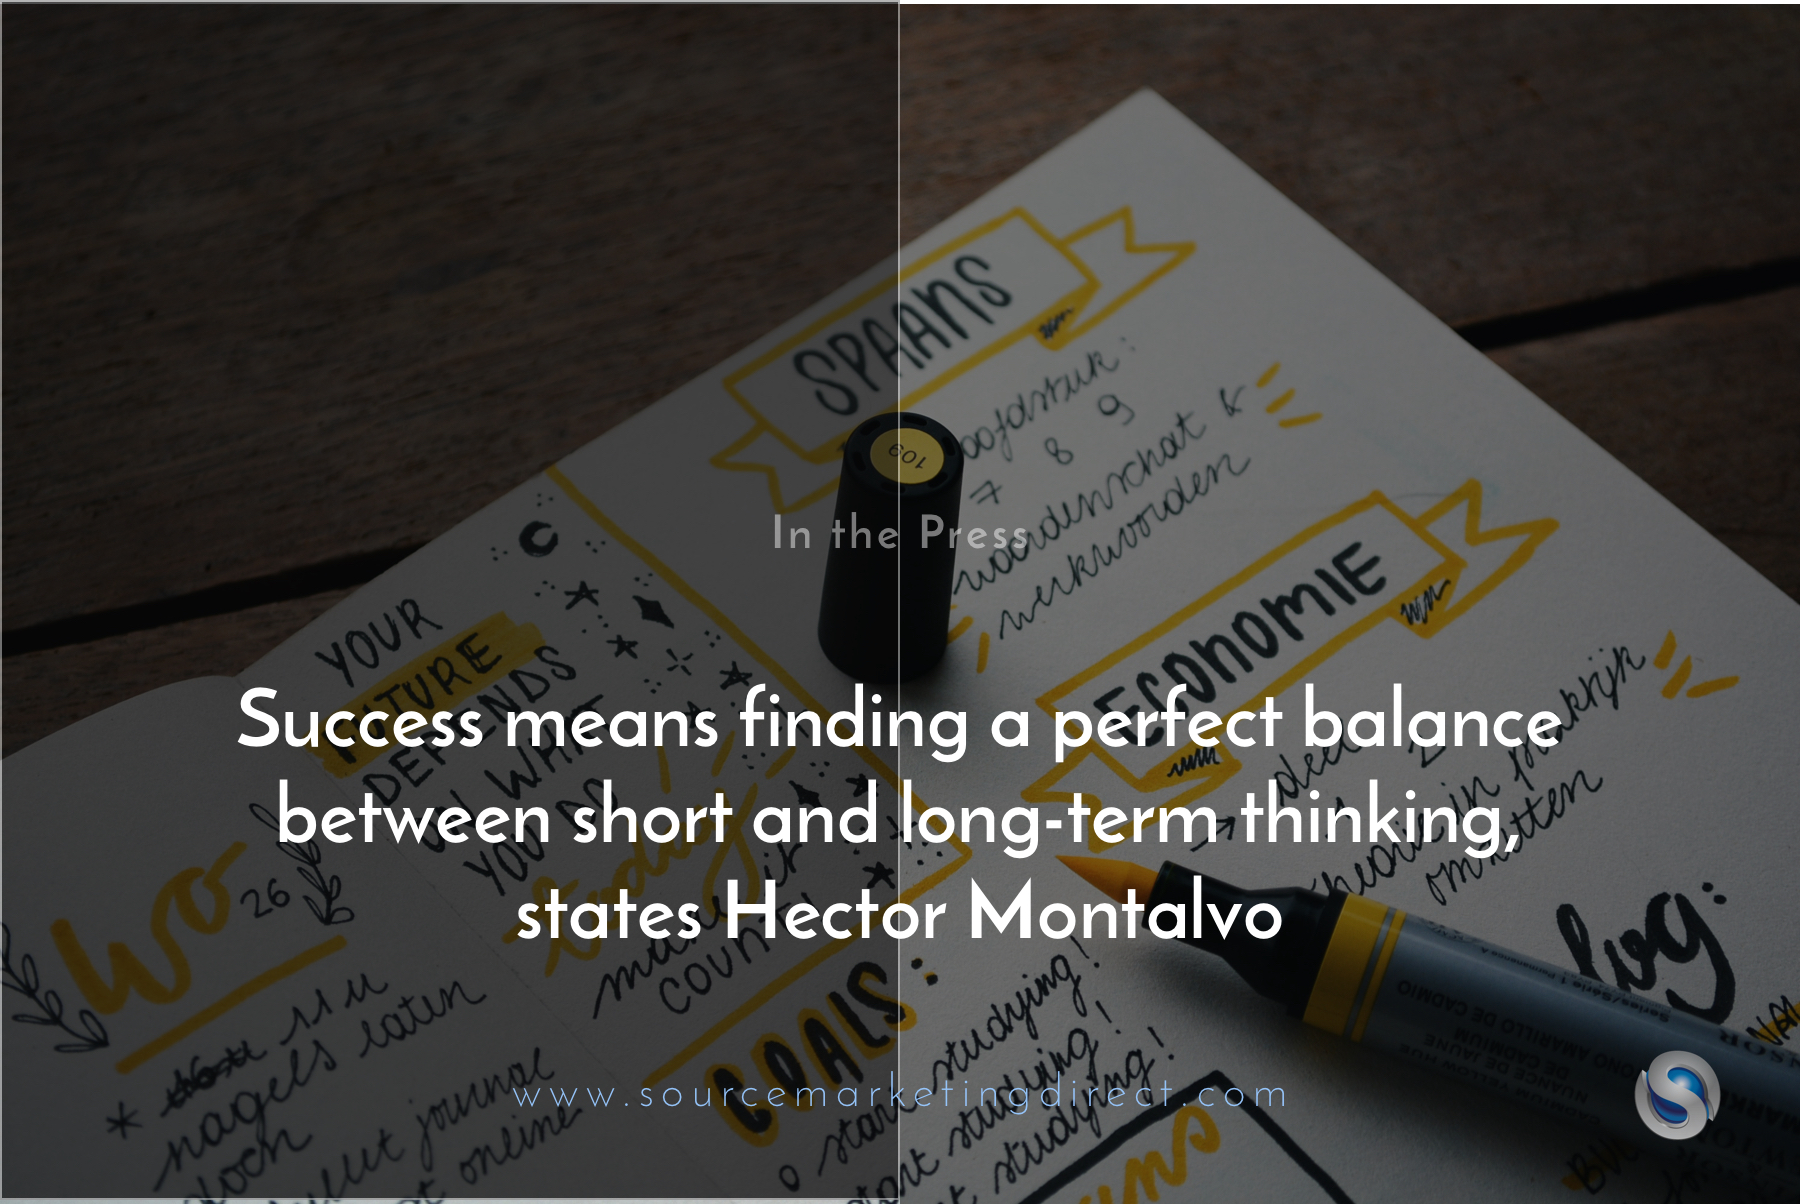 Success means finding a perfect balance between short and long-term thinking, states Hector Montalvo